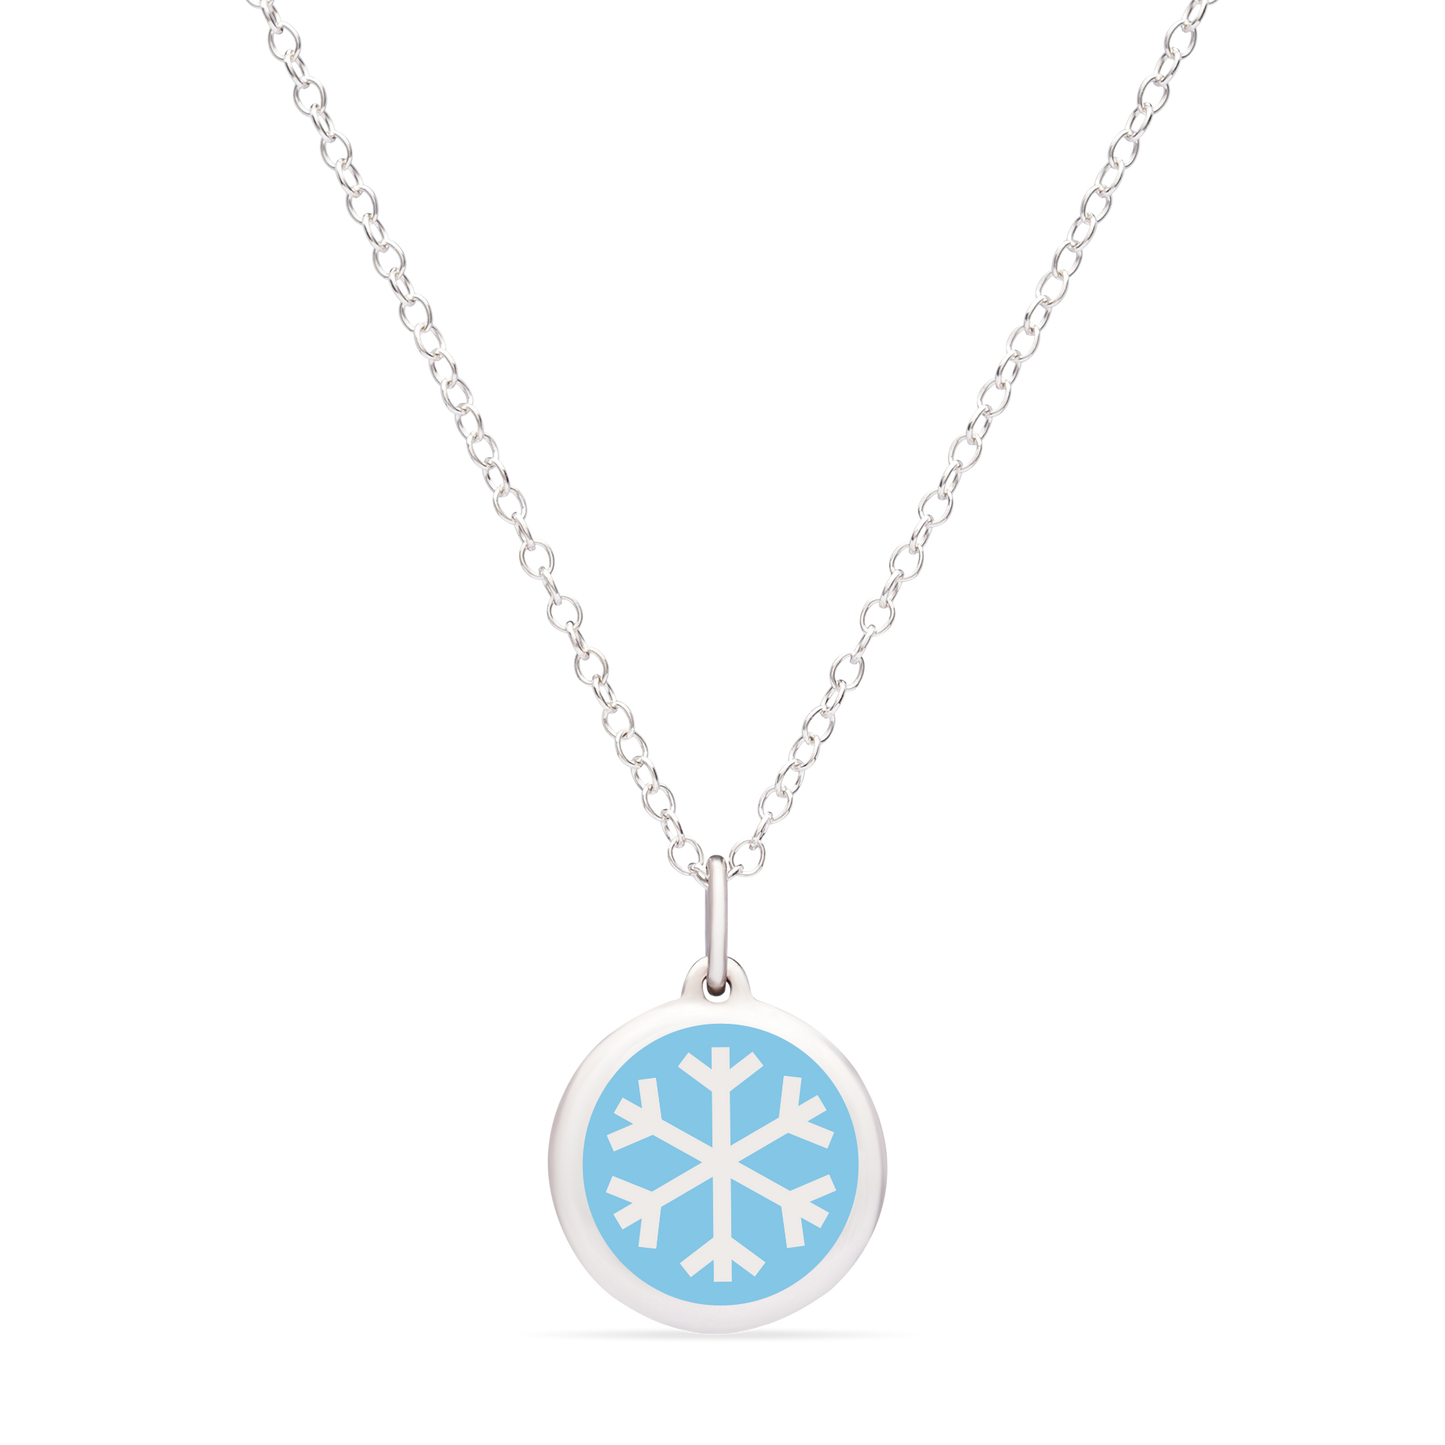 MINI SNOWFLAKE CHARM sterling silver with rhodium plate